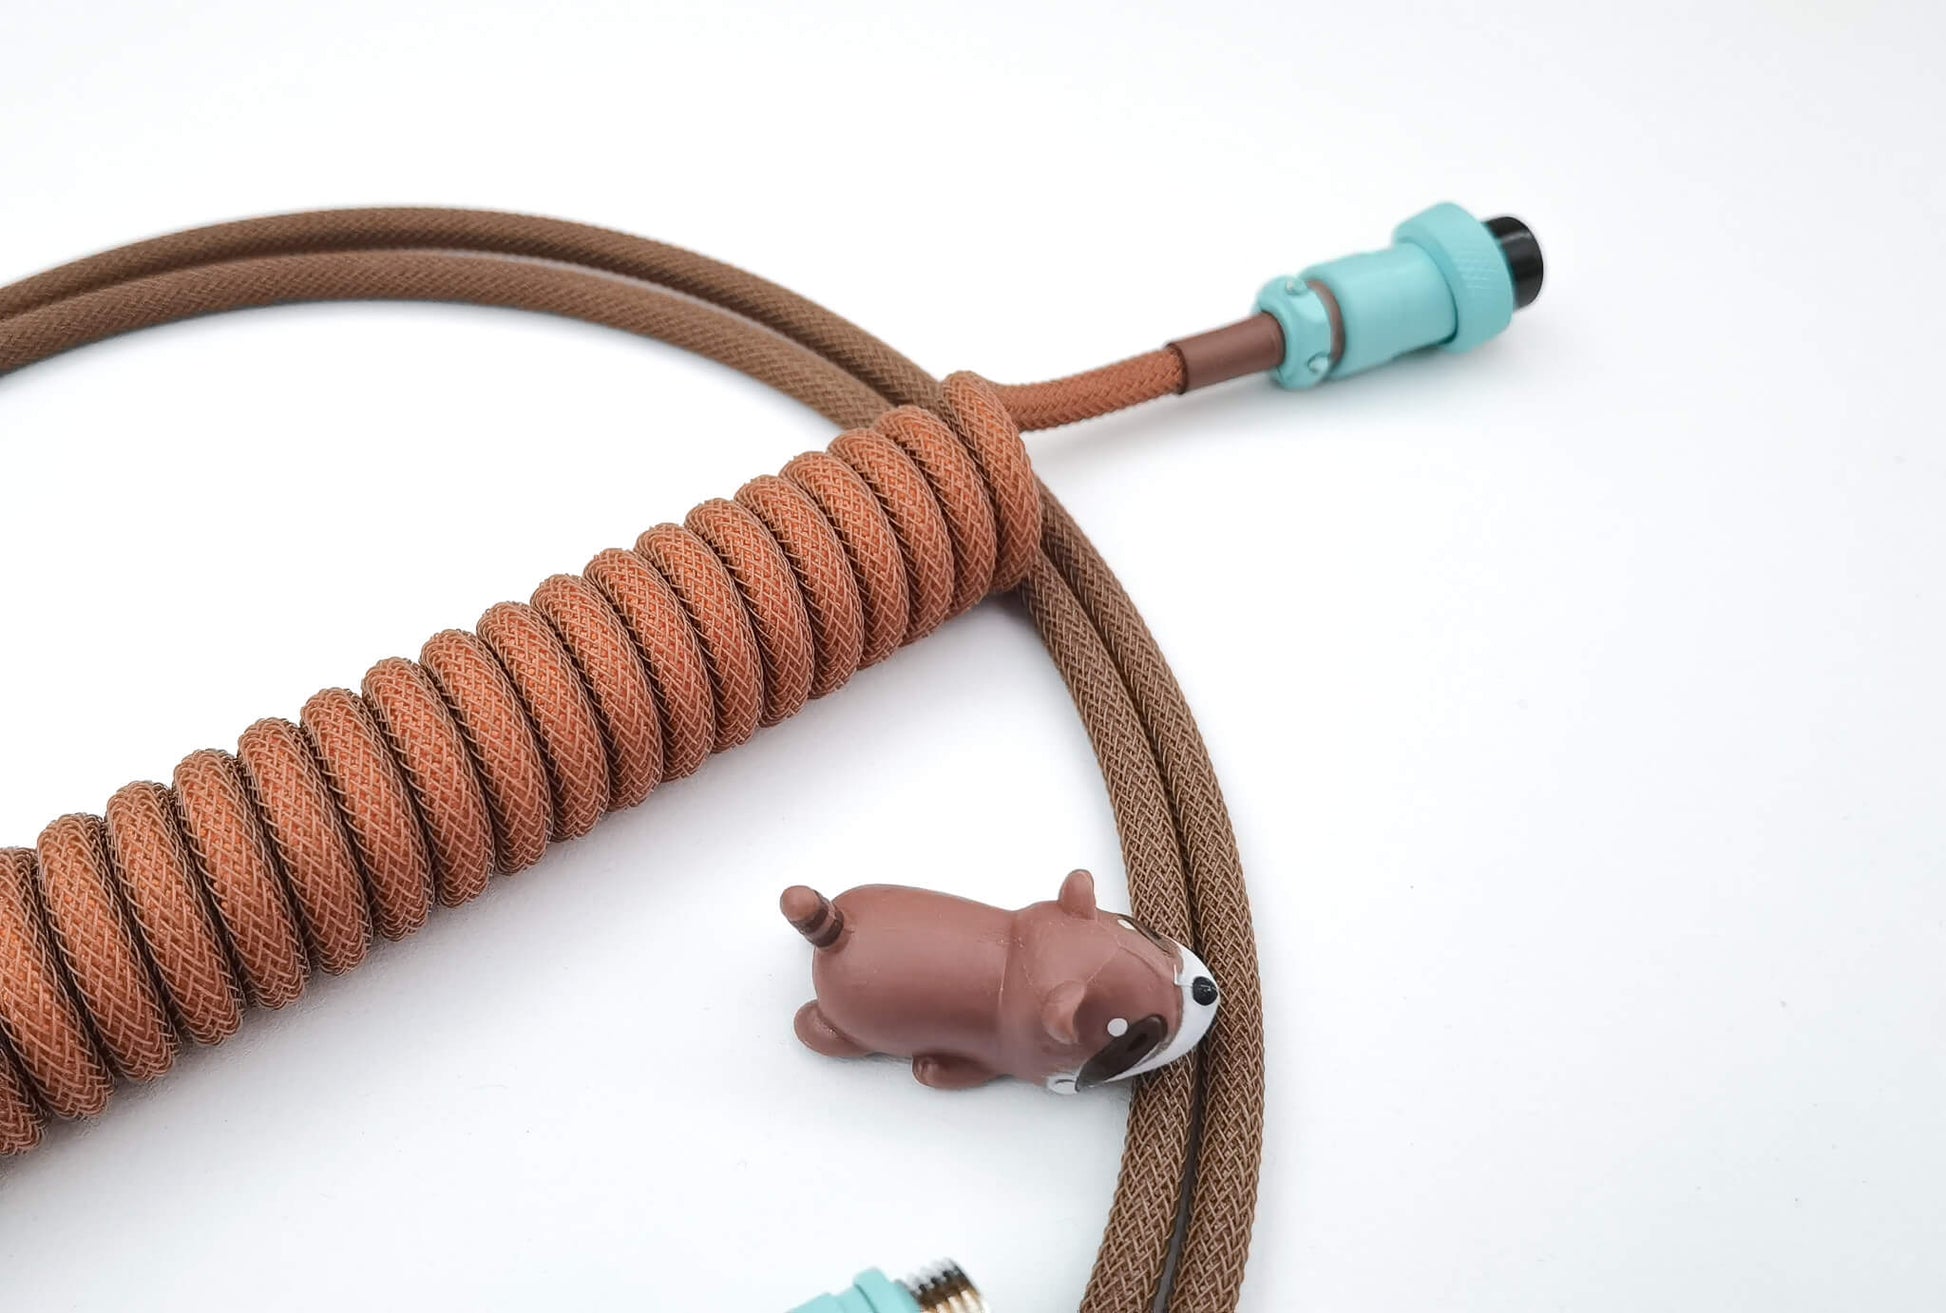 Custom cable for GMK Copper keycaps